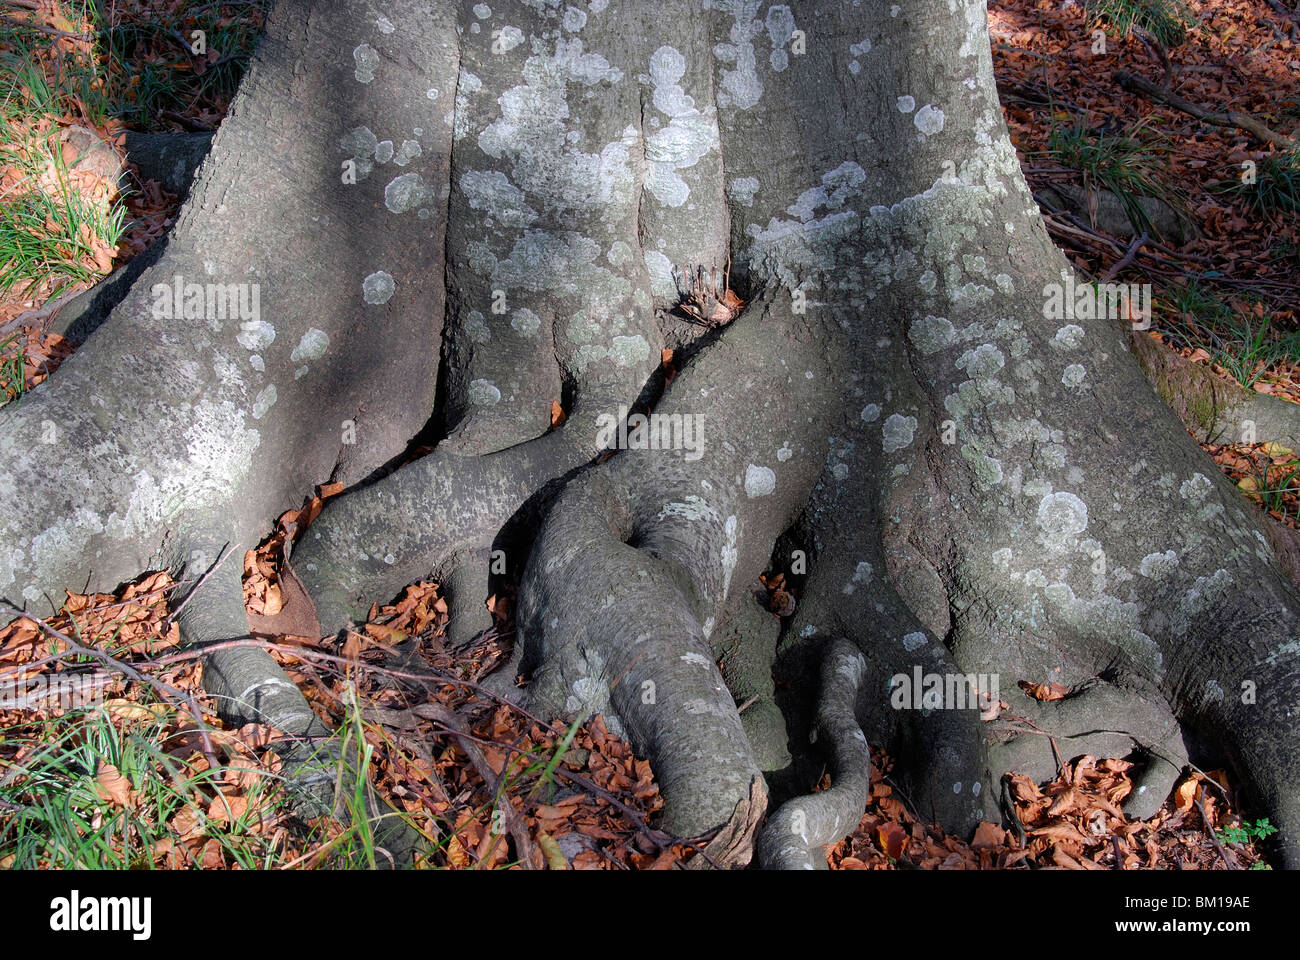 Beech tree with lichens Stock Photo